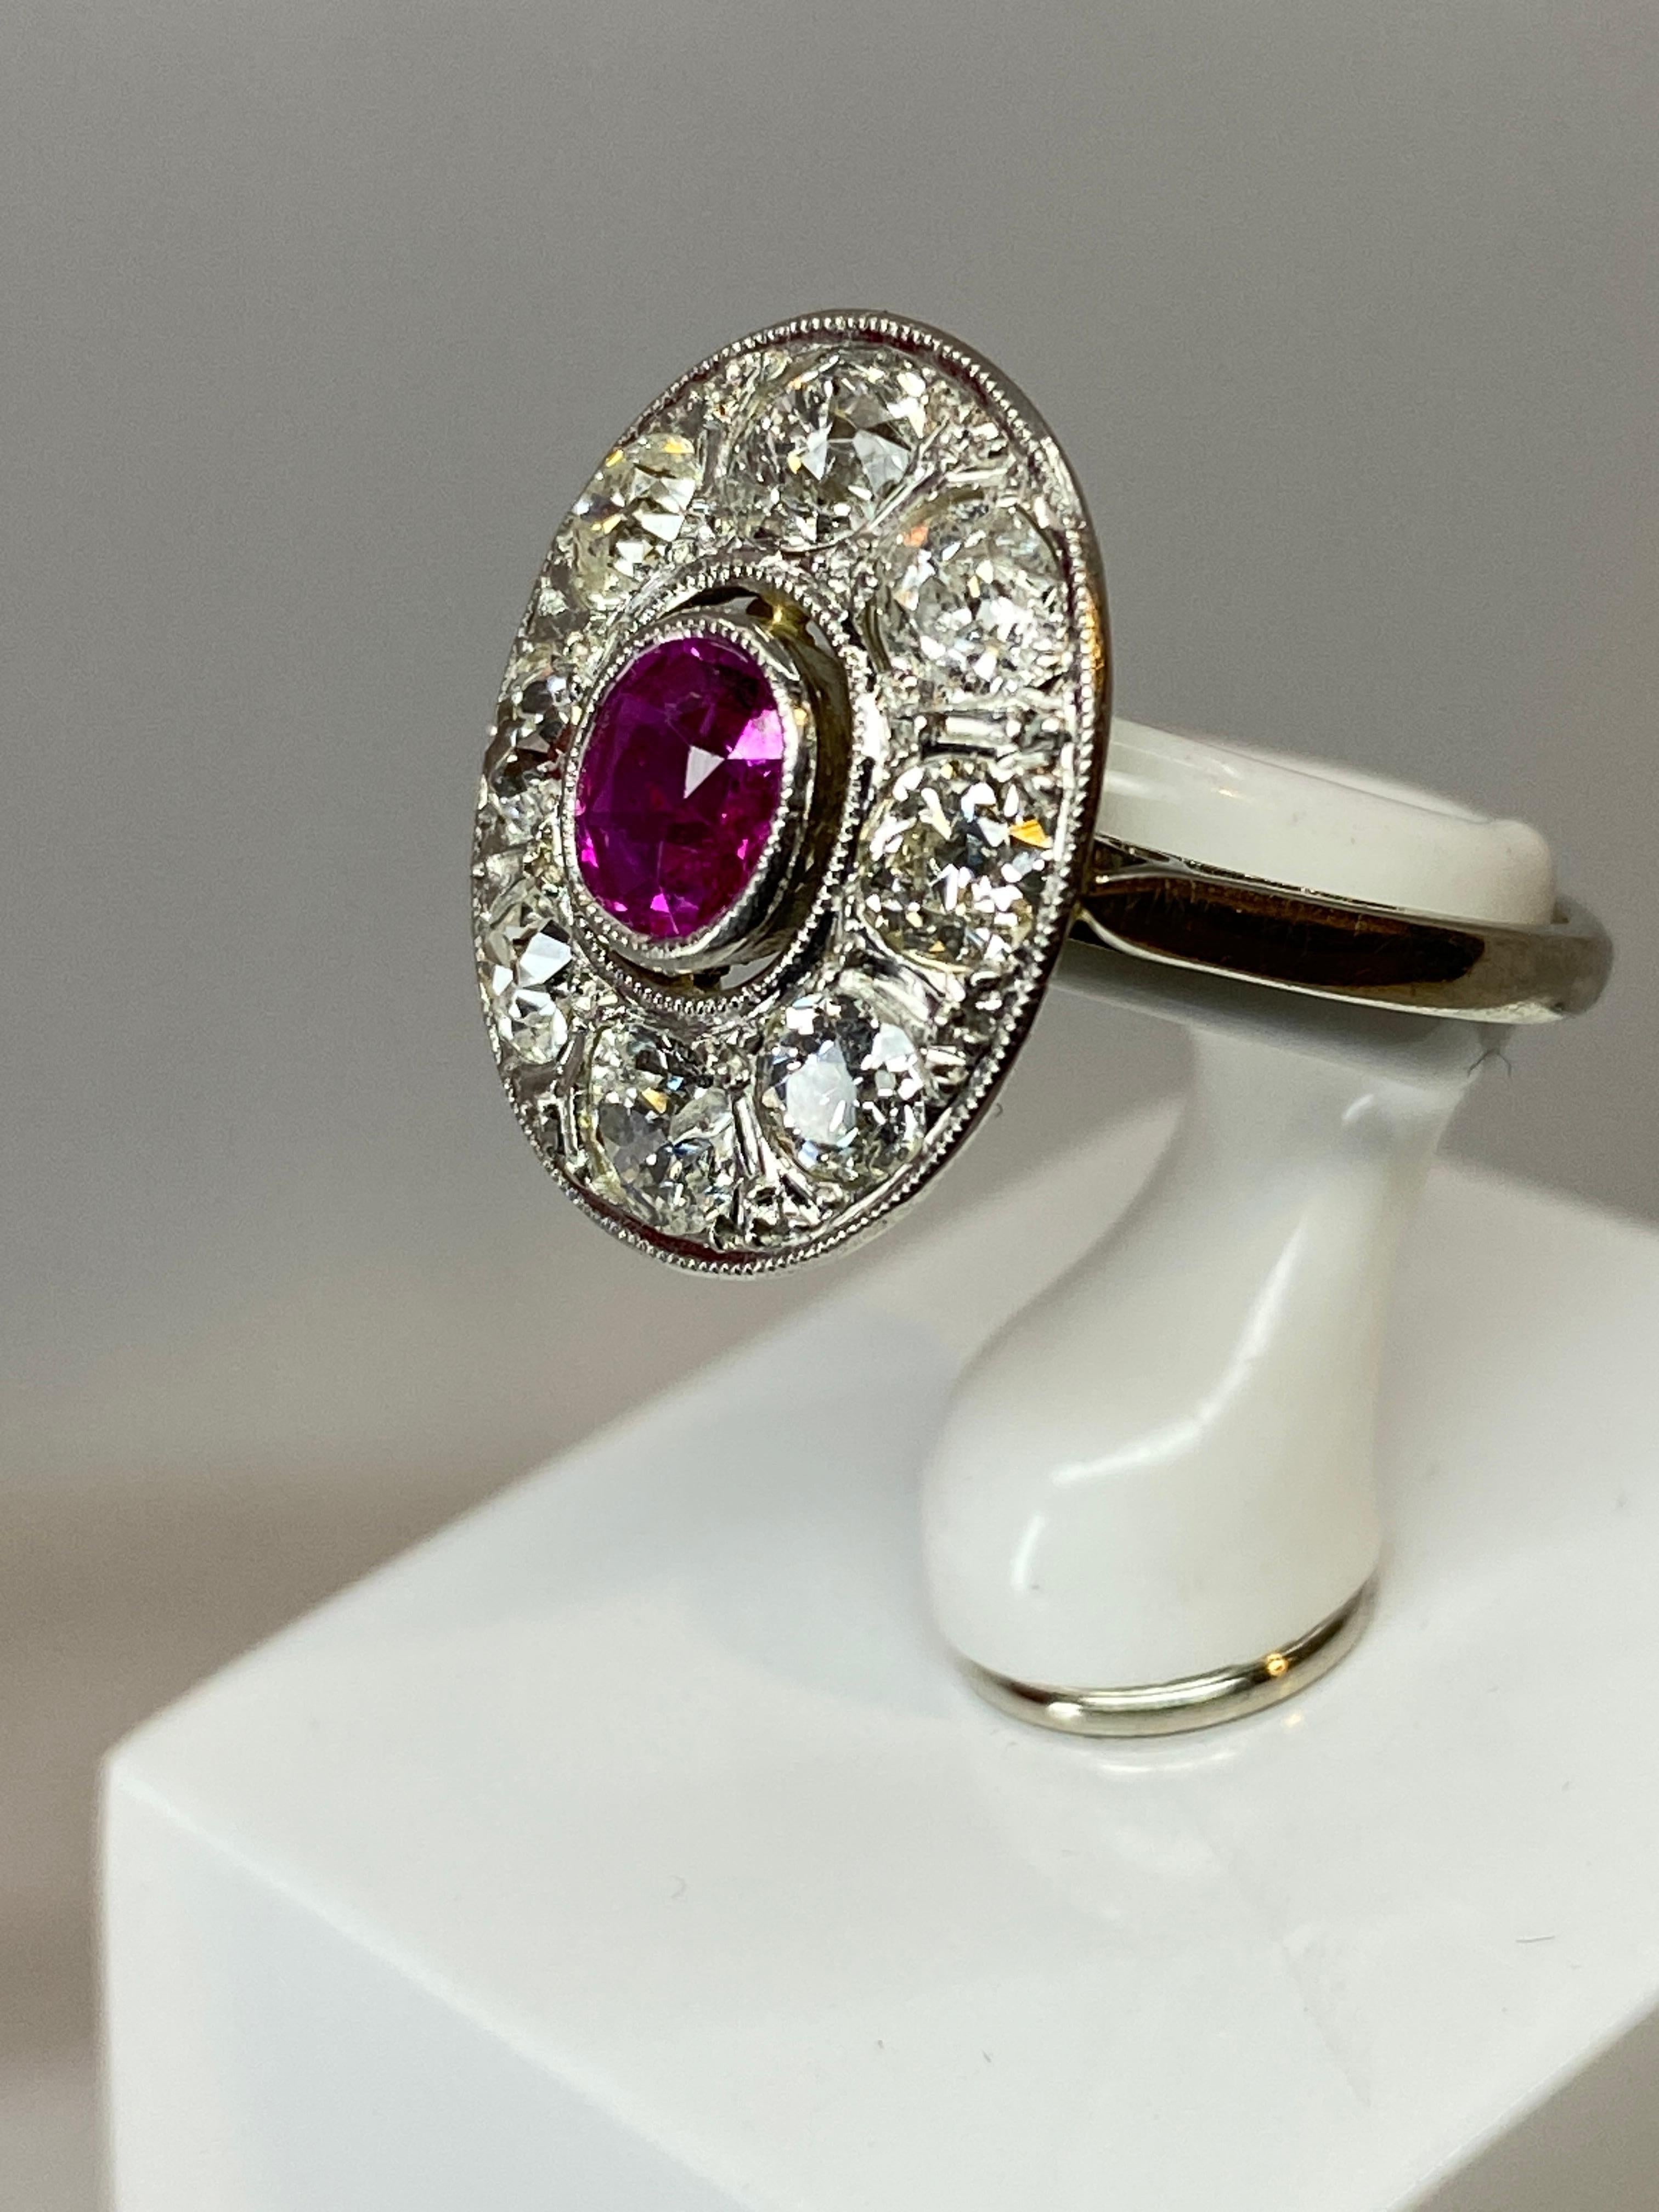 Oval Ring in 18 Carat Gold Set with a Ruby and Diamonds, 1900 Period For Sale 5